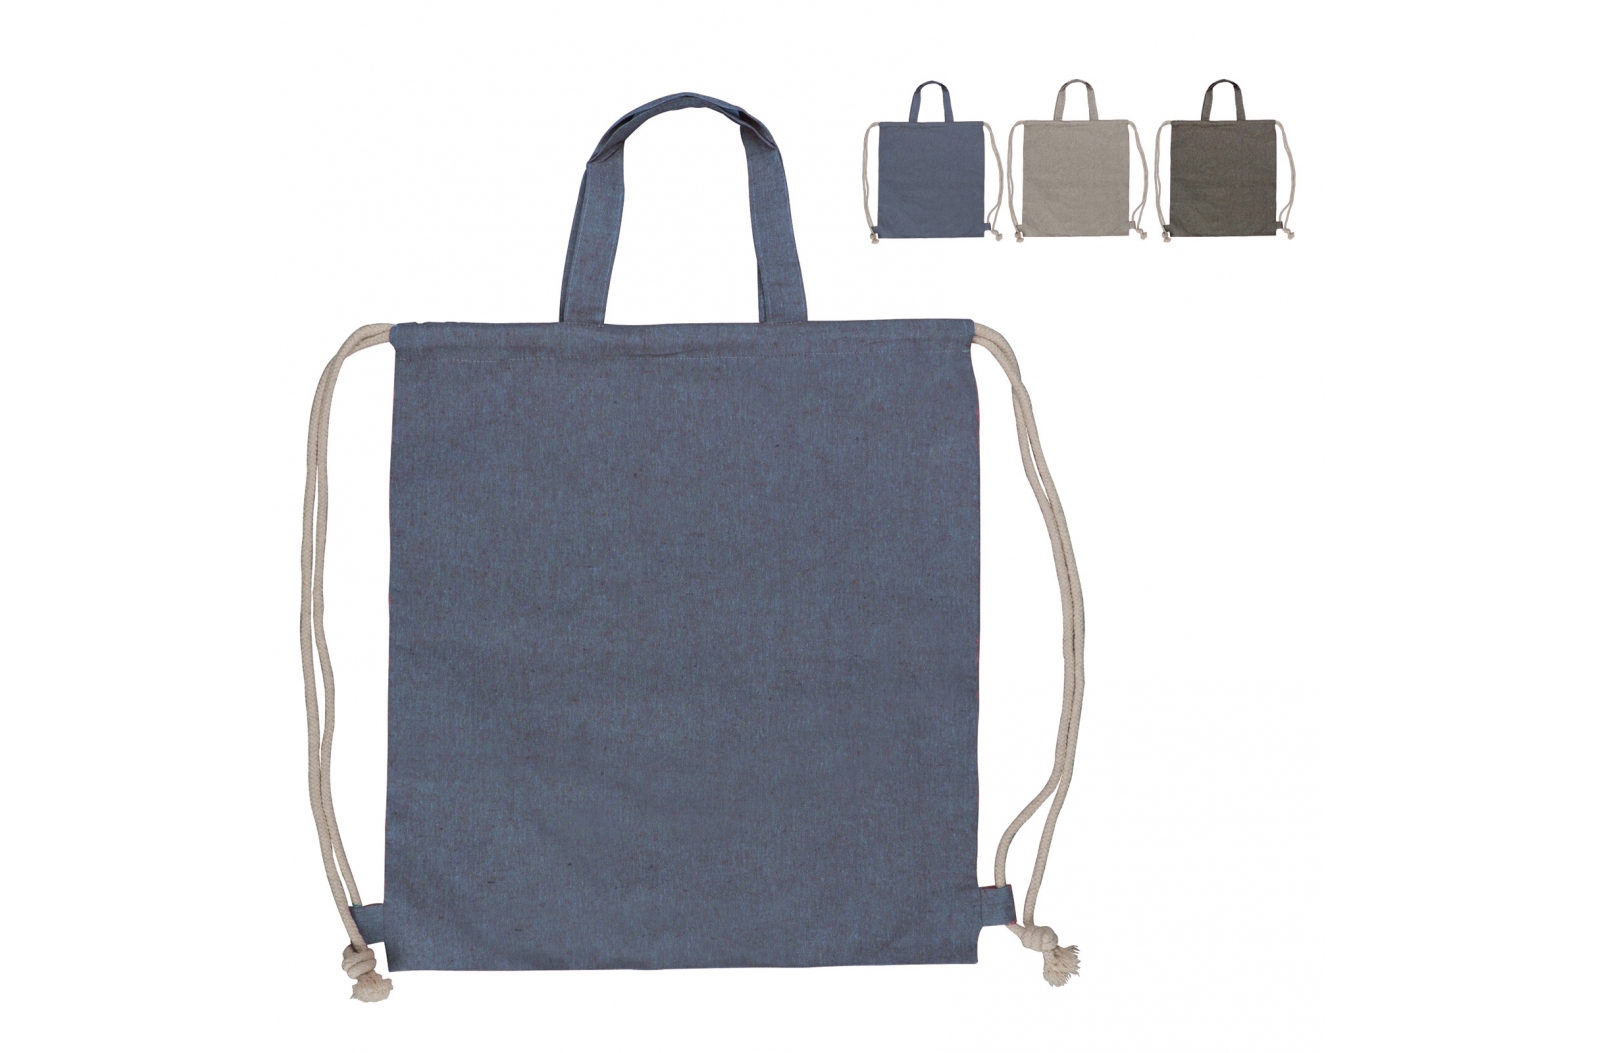 Bag made of recycled cotton with handles that can be closed using drawstrings - Frodsham